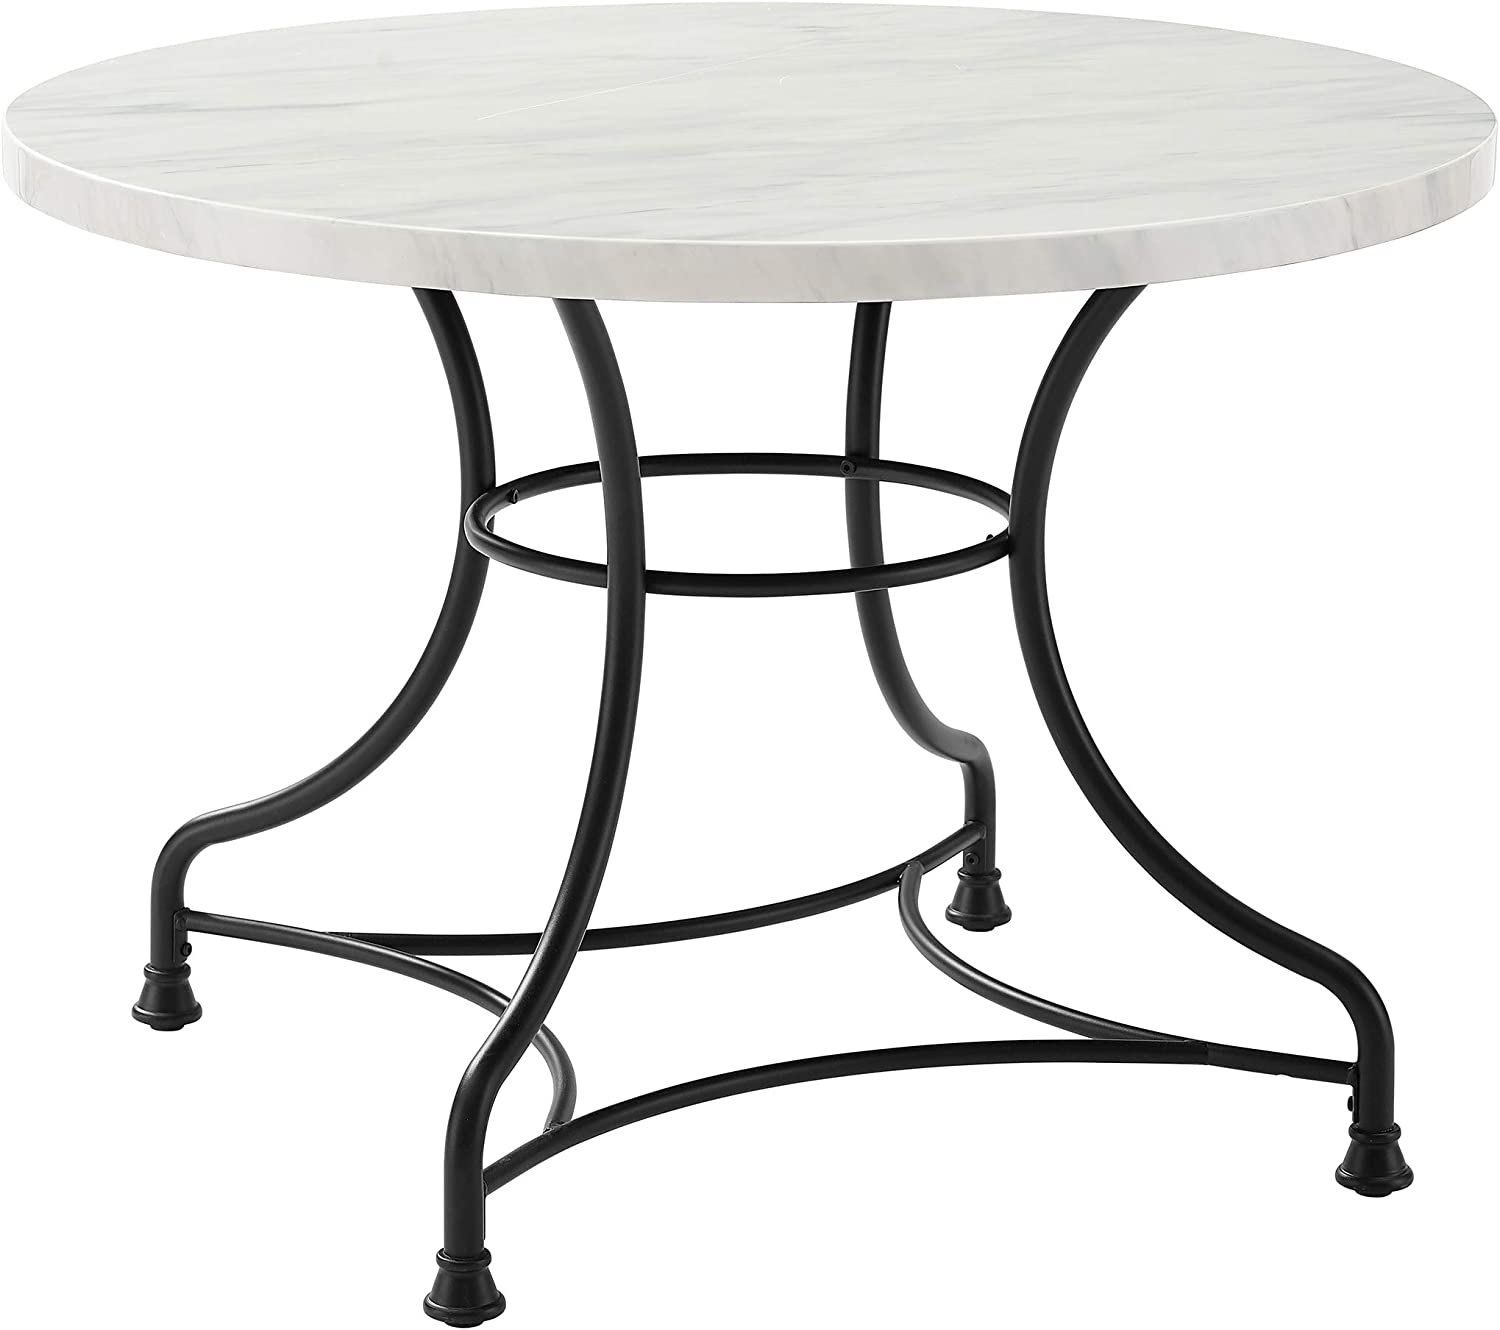 B07TC9ZF5M Crosley Furniture Madeleine 40" Round Dining Table, Steel with Faux Marble Top